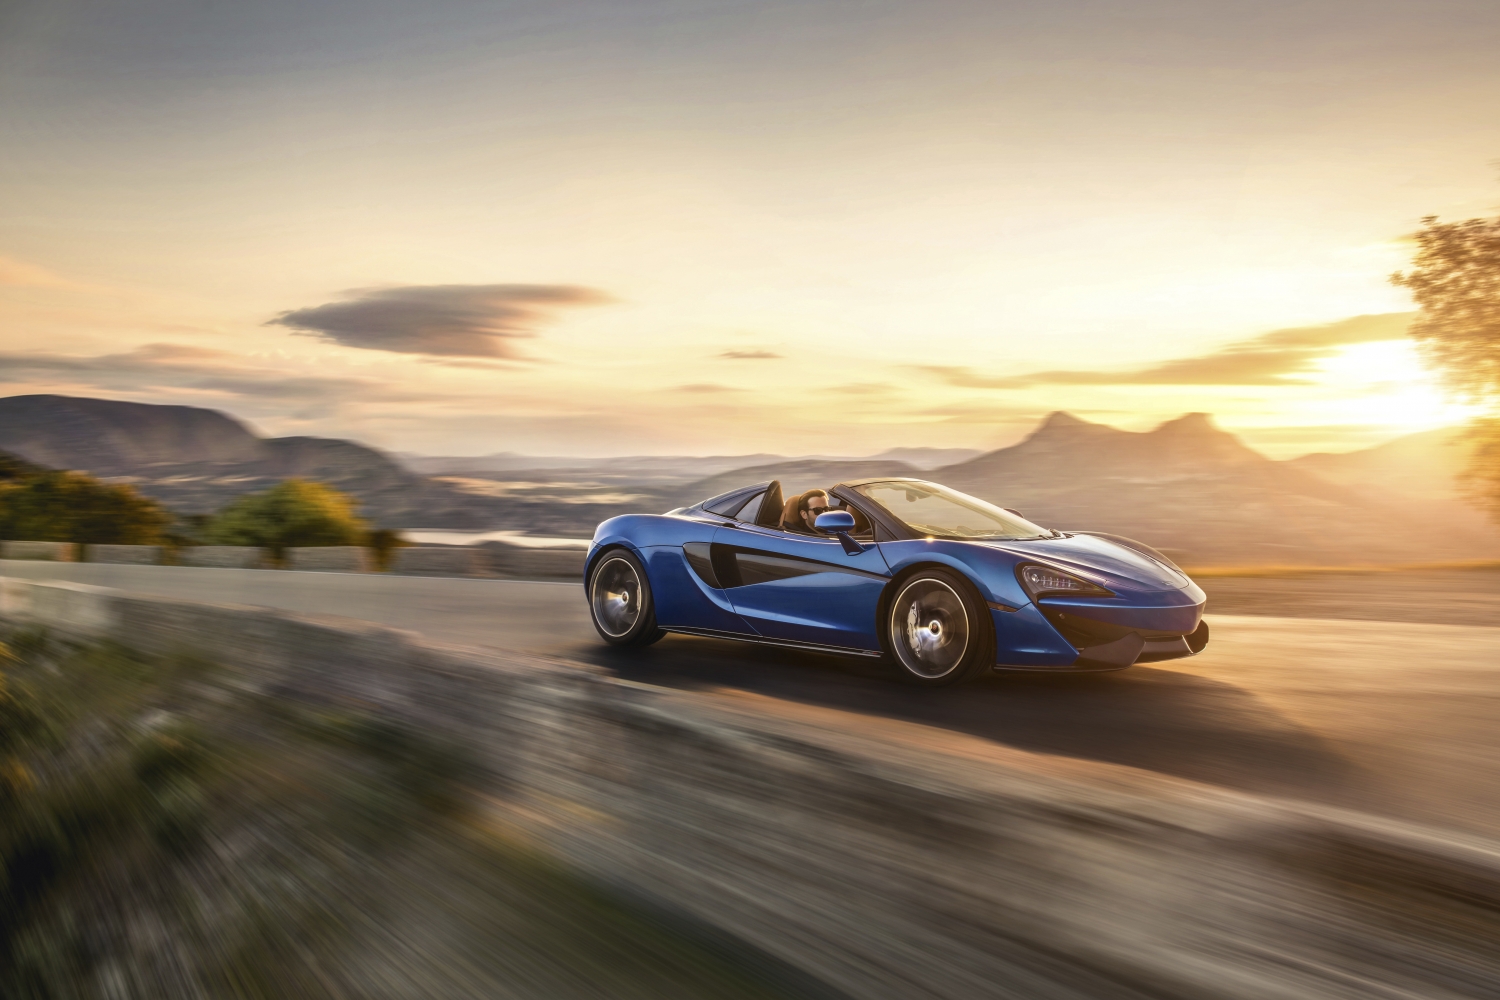 McLaren 570S Spider: a convertible without compromise